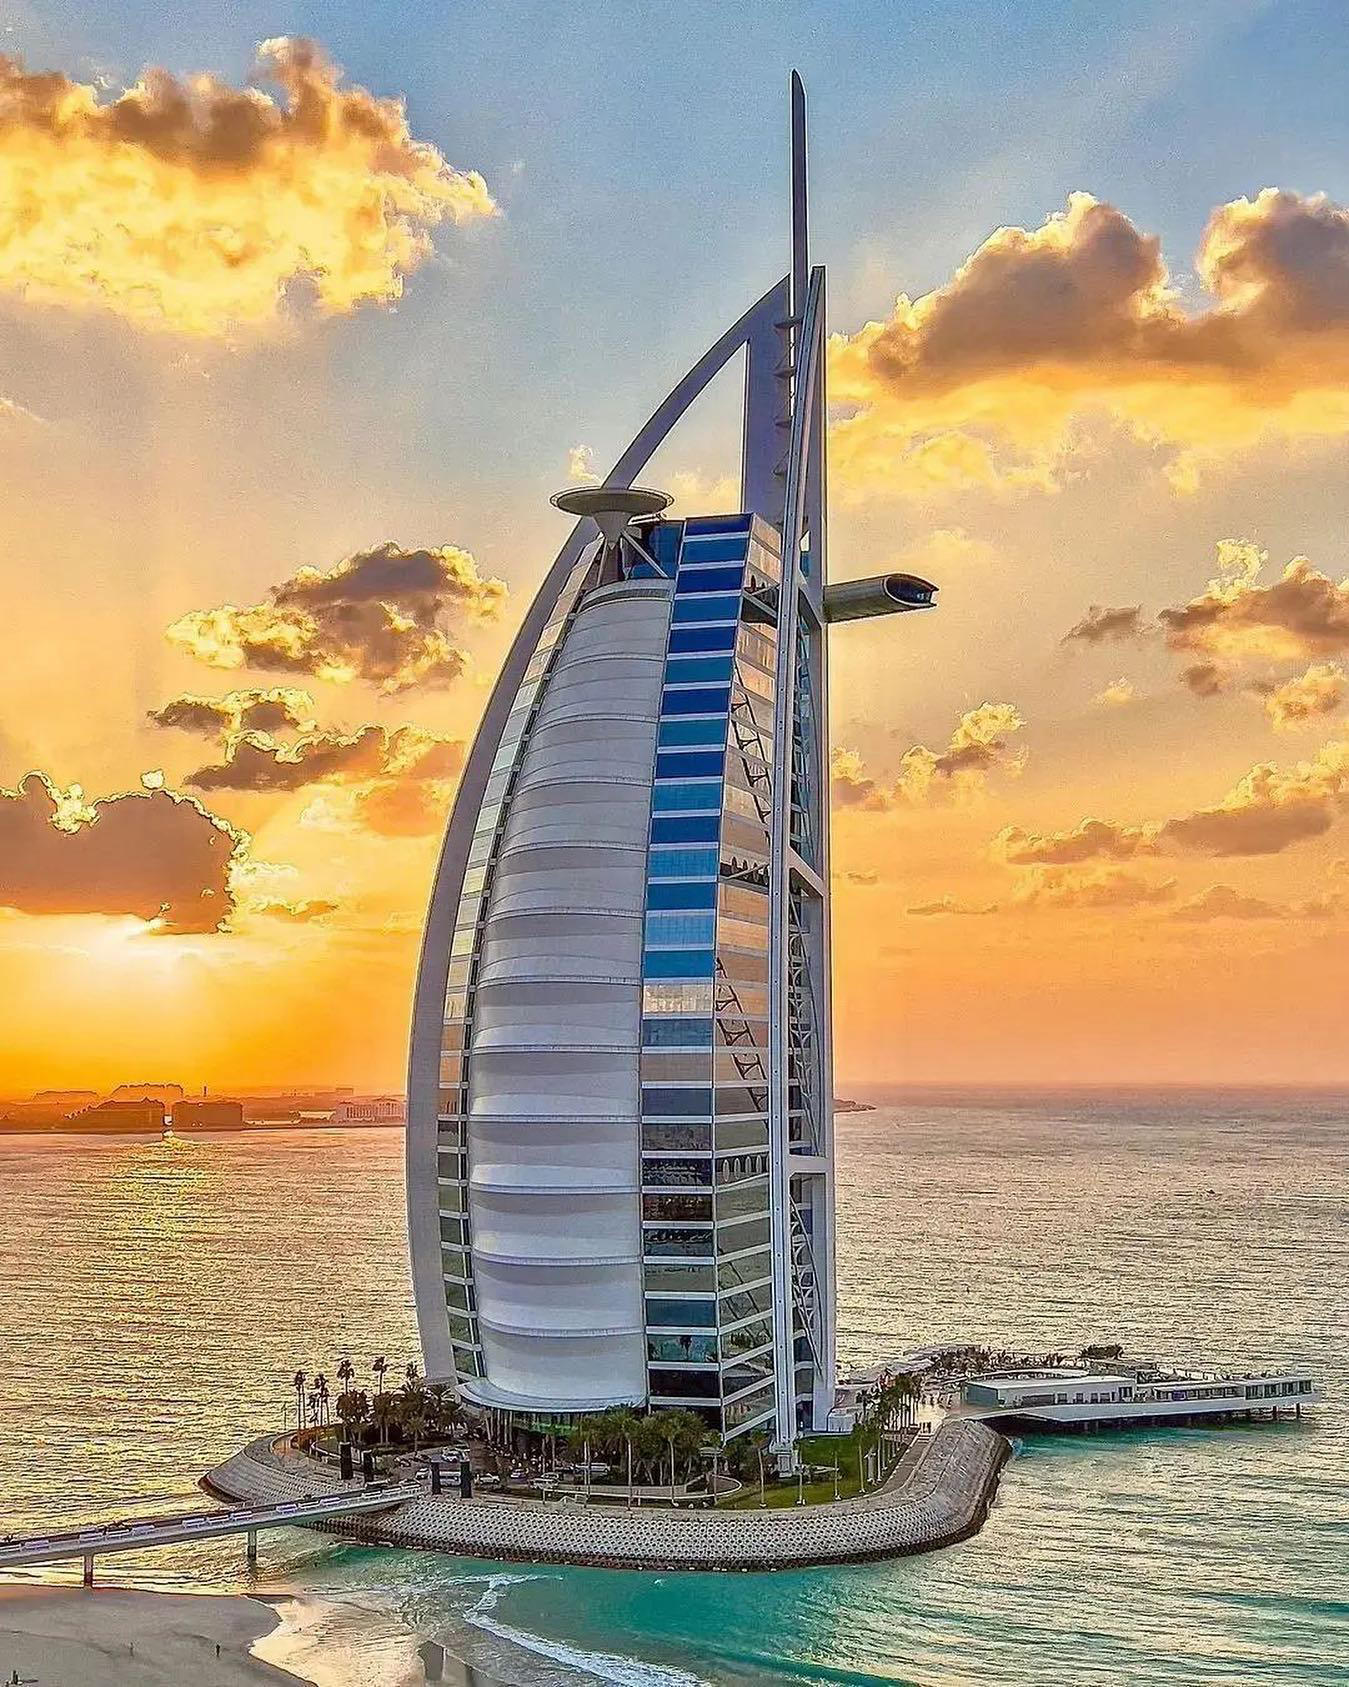 Burj Al Arab - Today, we celebrate 23 years of breathtaking experiences and unforgettable moments at